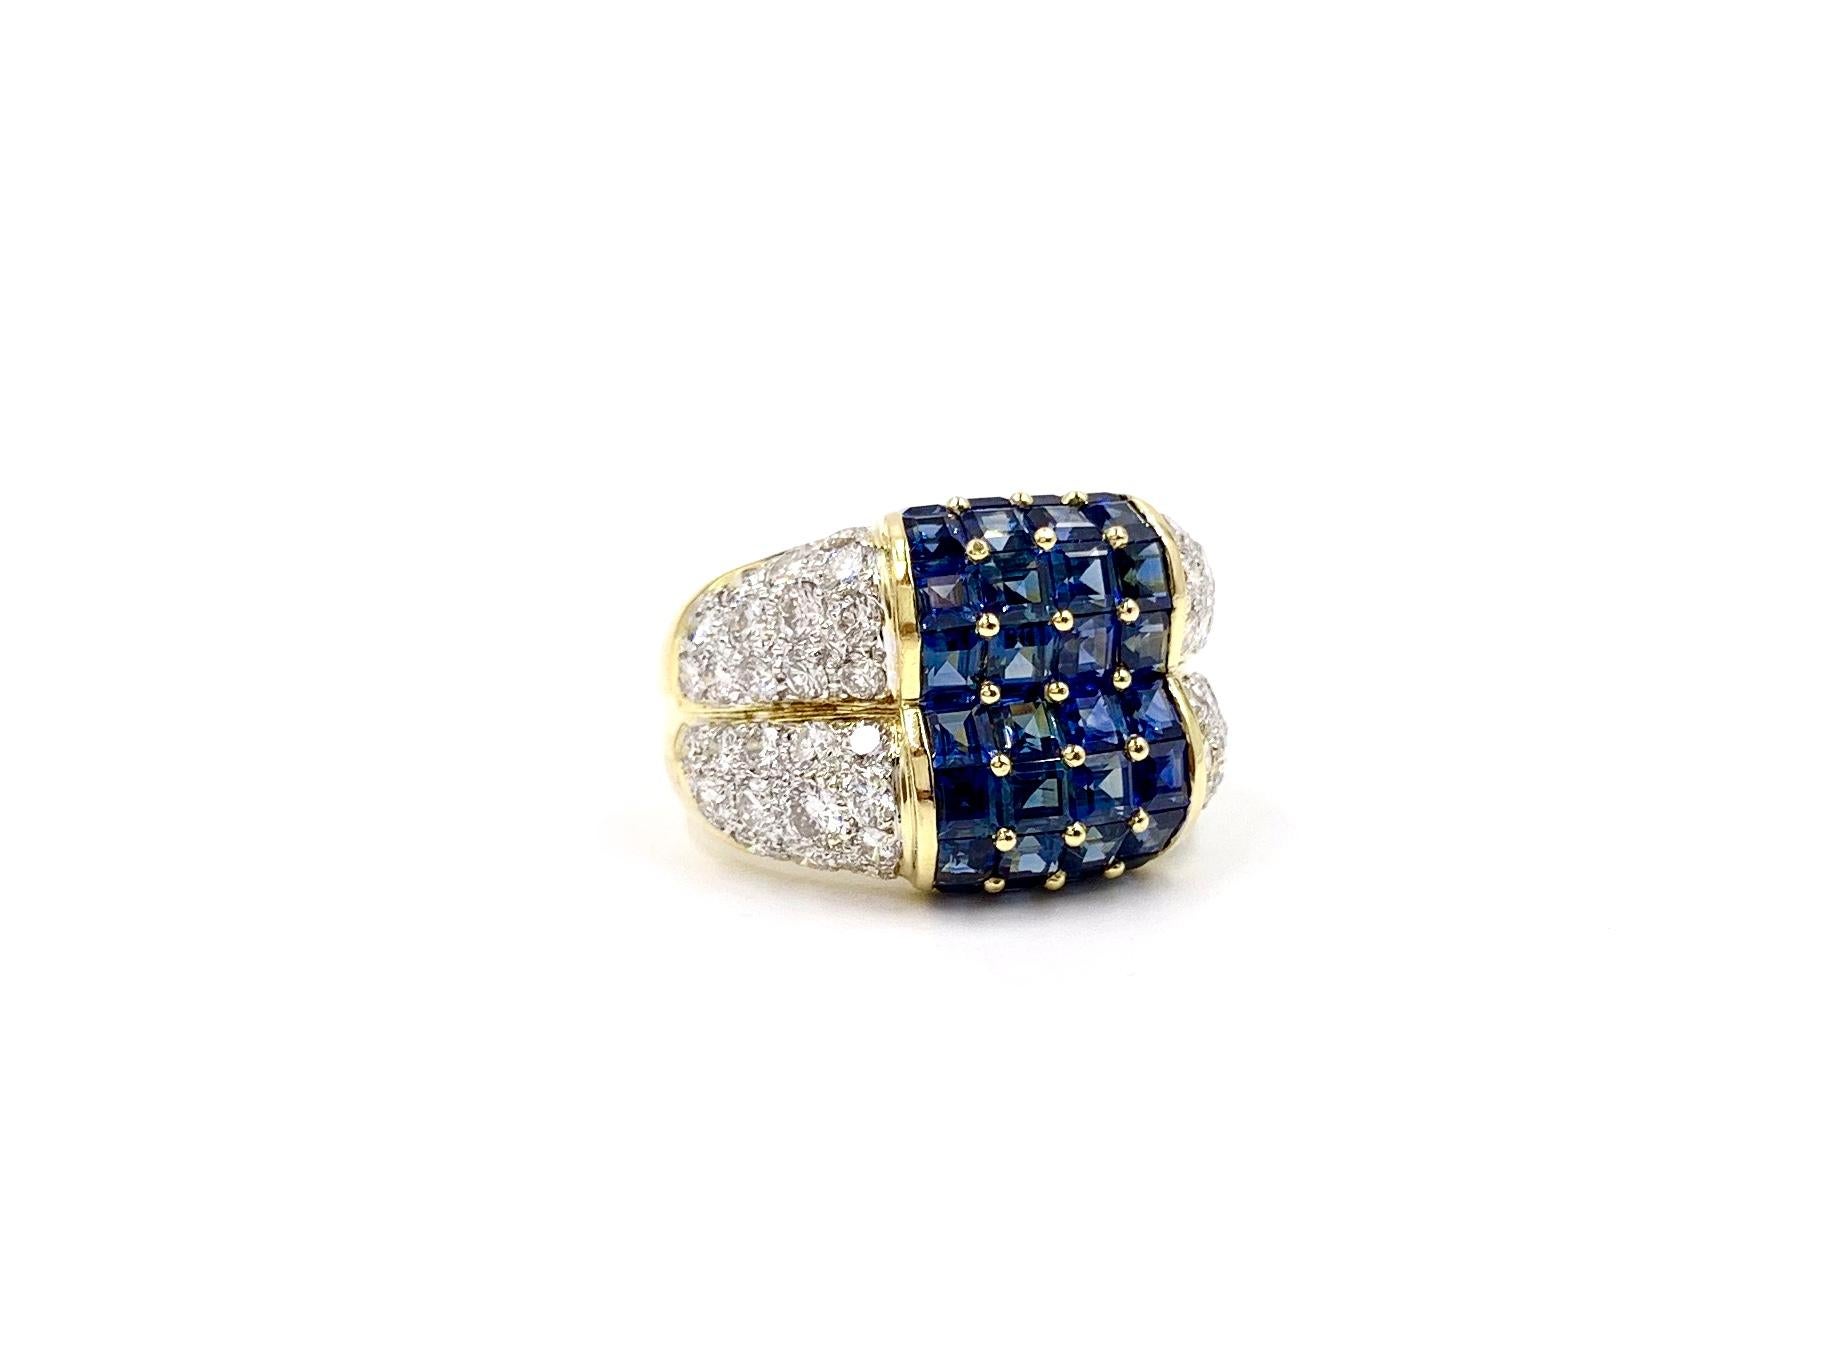 A true statement piece made with high quality blue sapphires and diamonds, this 18 karat yellow gold wide ring features 32 square step cut blue sapphires at approximately 6.72 carats total weight. Blue sapphires are of a very fine quality with